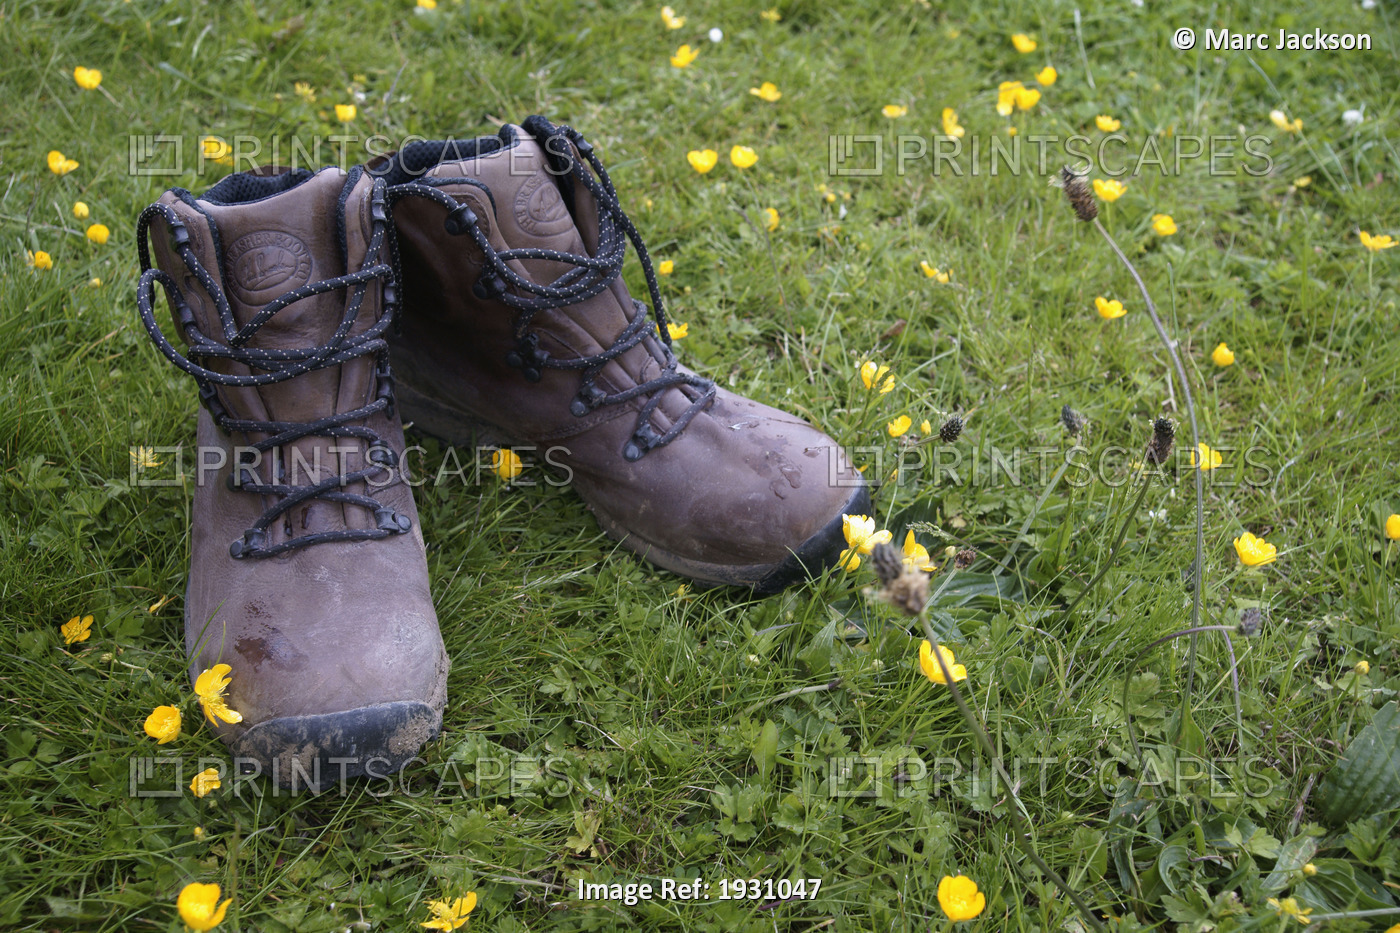 A pair of Hiking Boots on green grass with yellow flowers., United Kingdom.